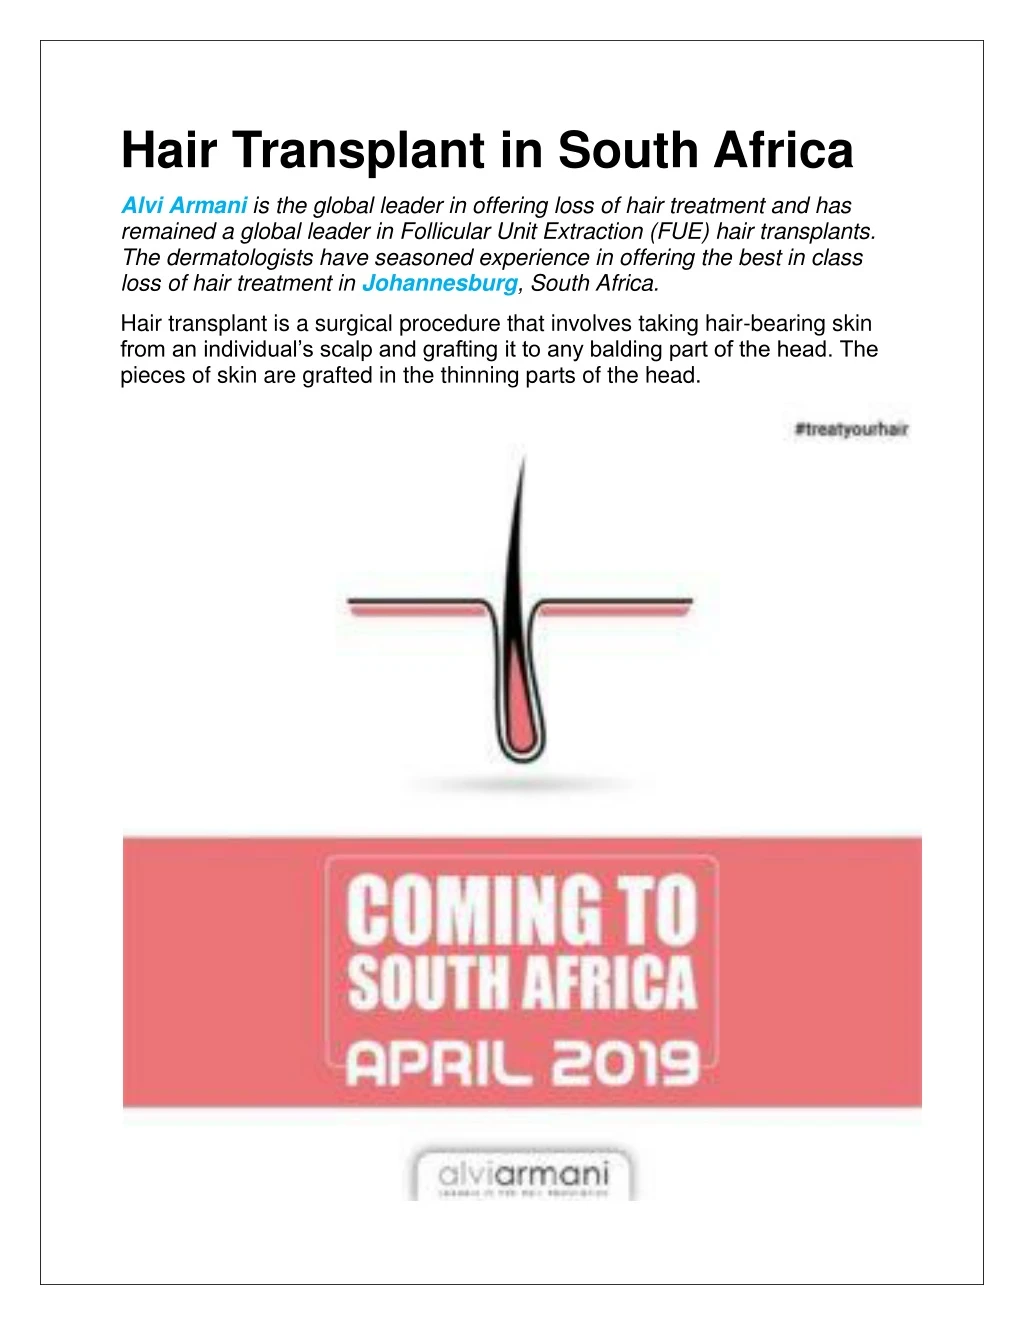 hair transplant in south africa